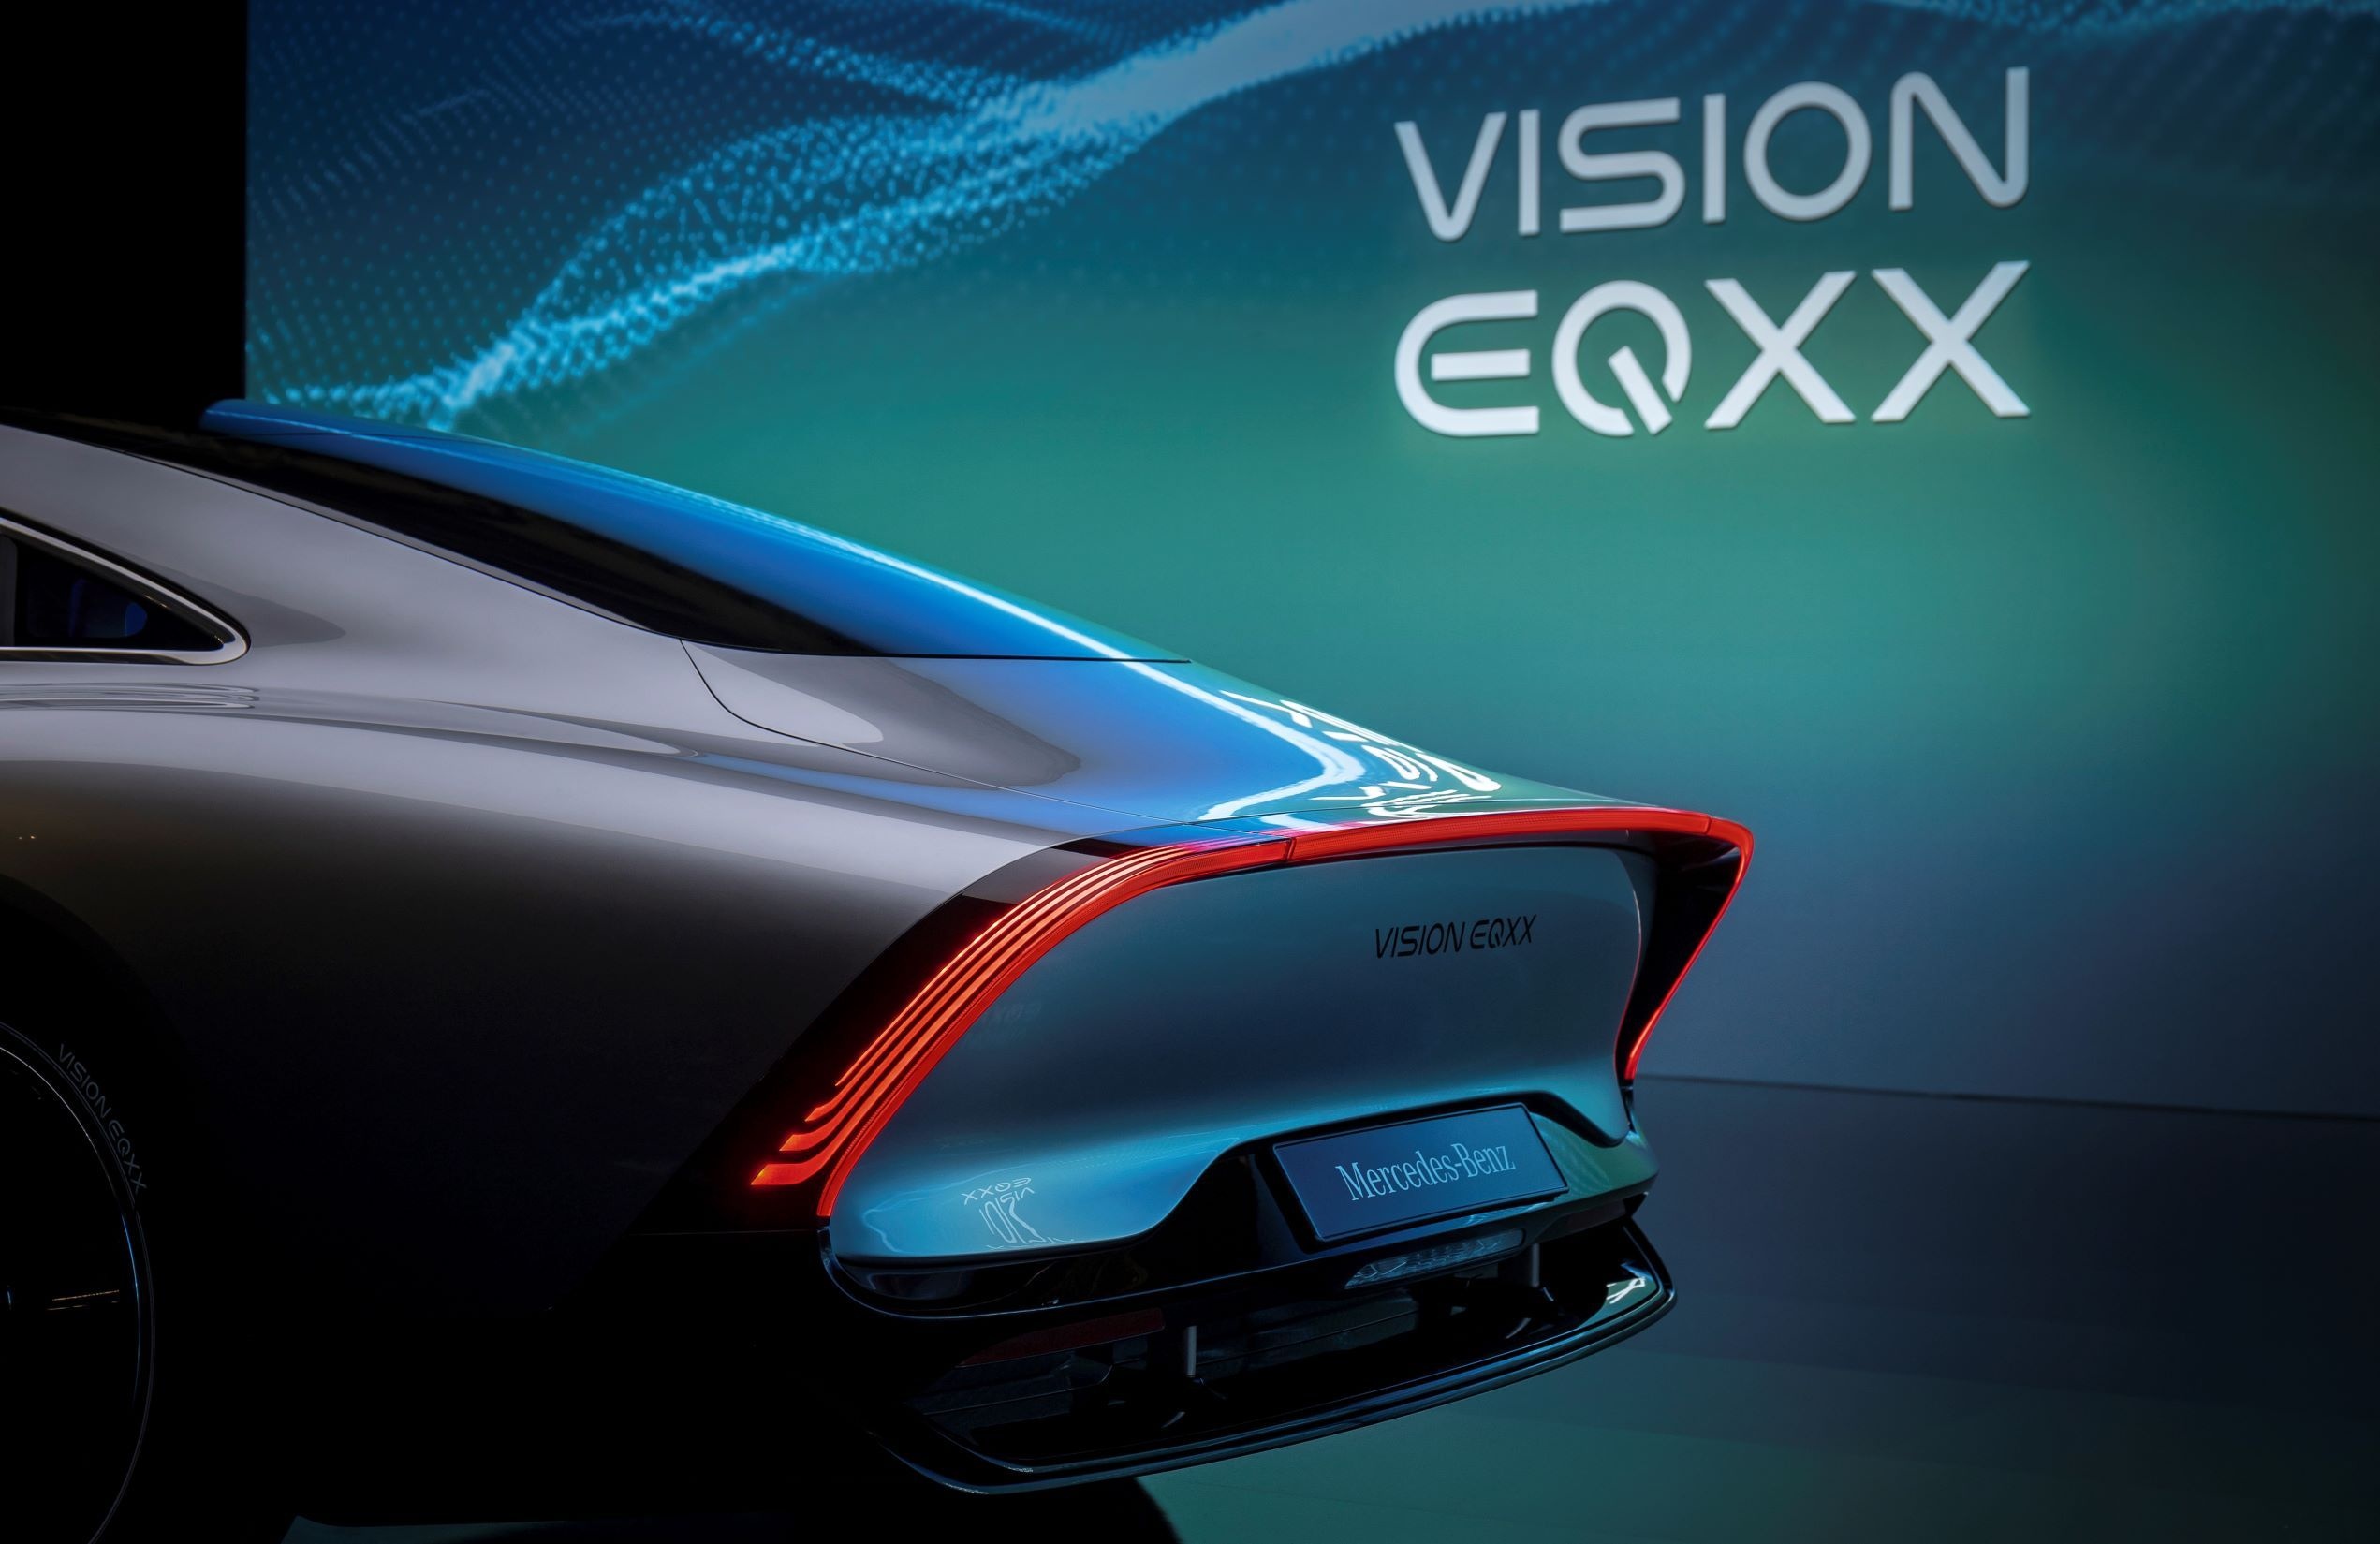 Every angle, Mercedes EQXX, Electric innovation, Automotive excellence, 2550x1650 HD Desktop